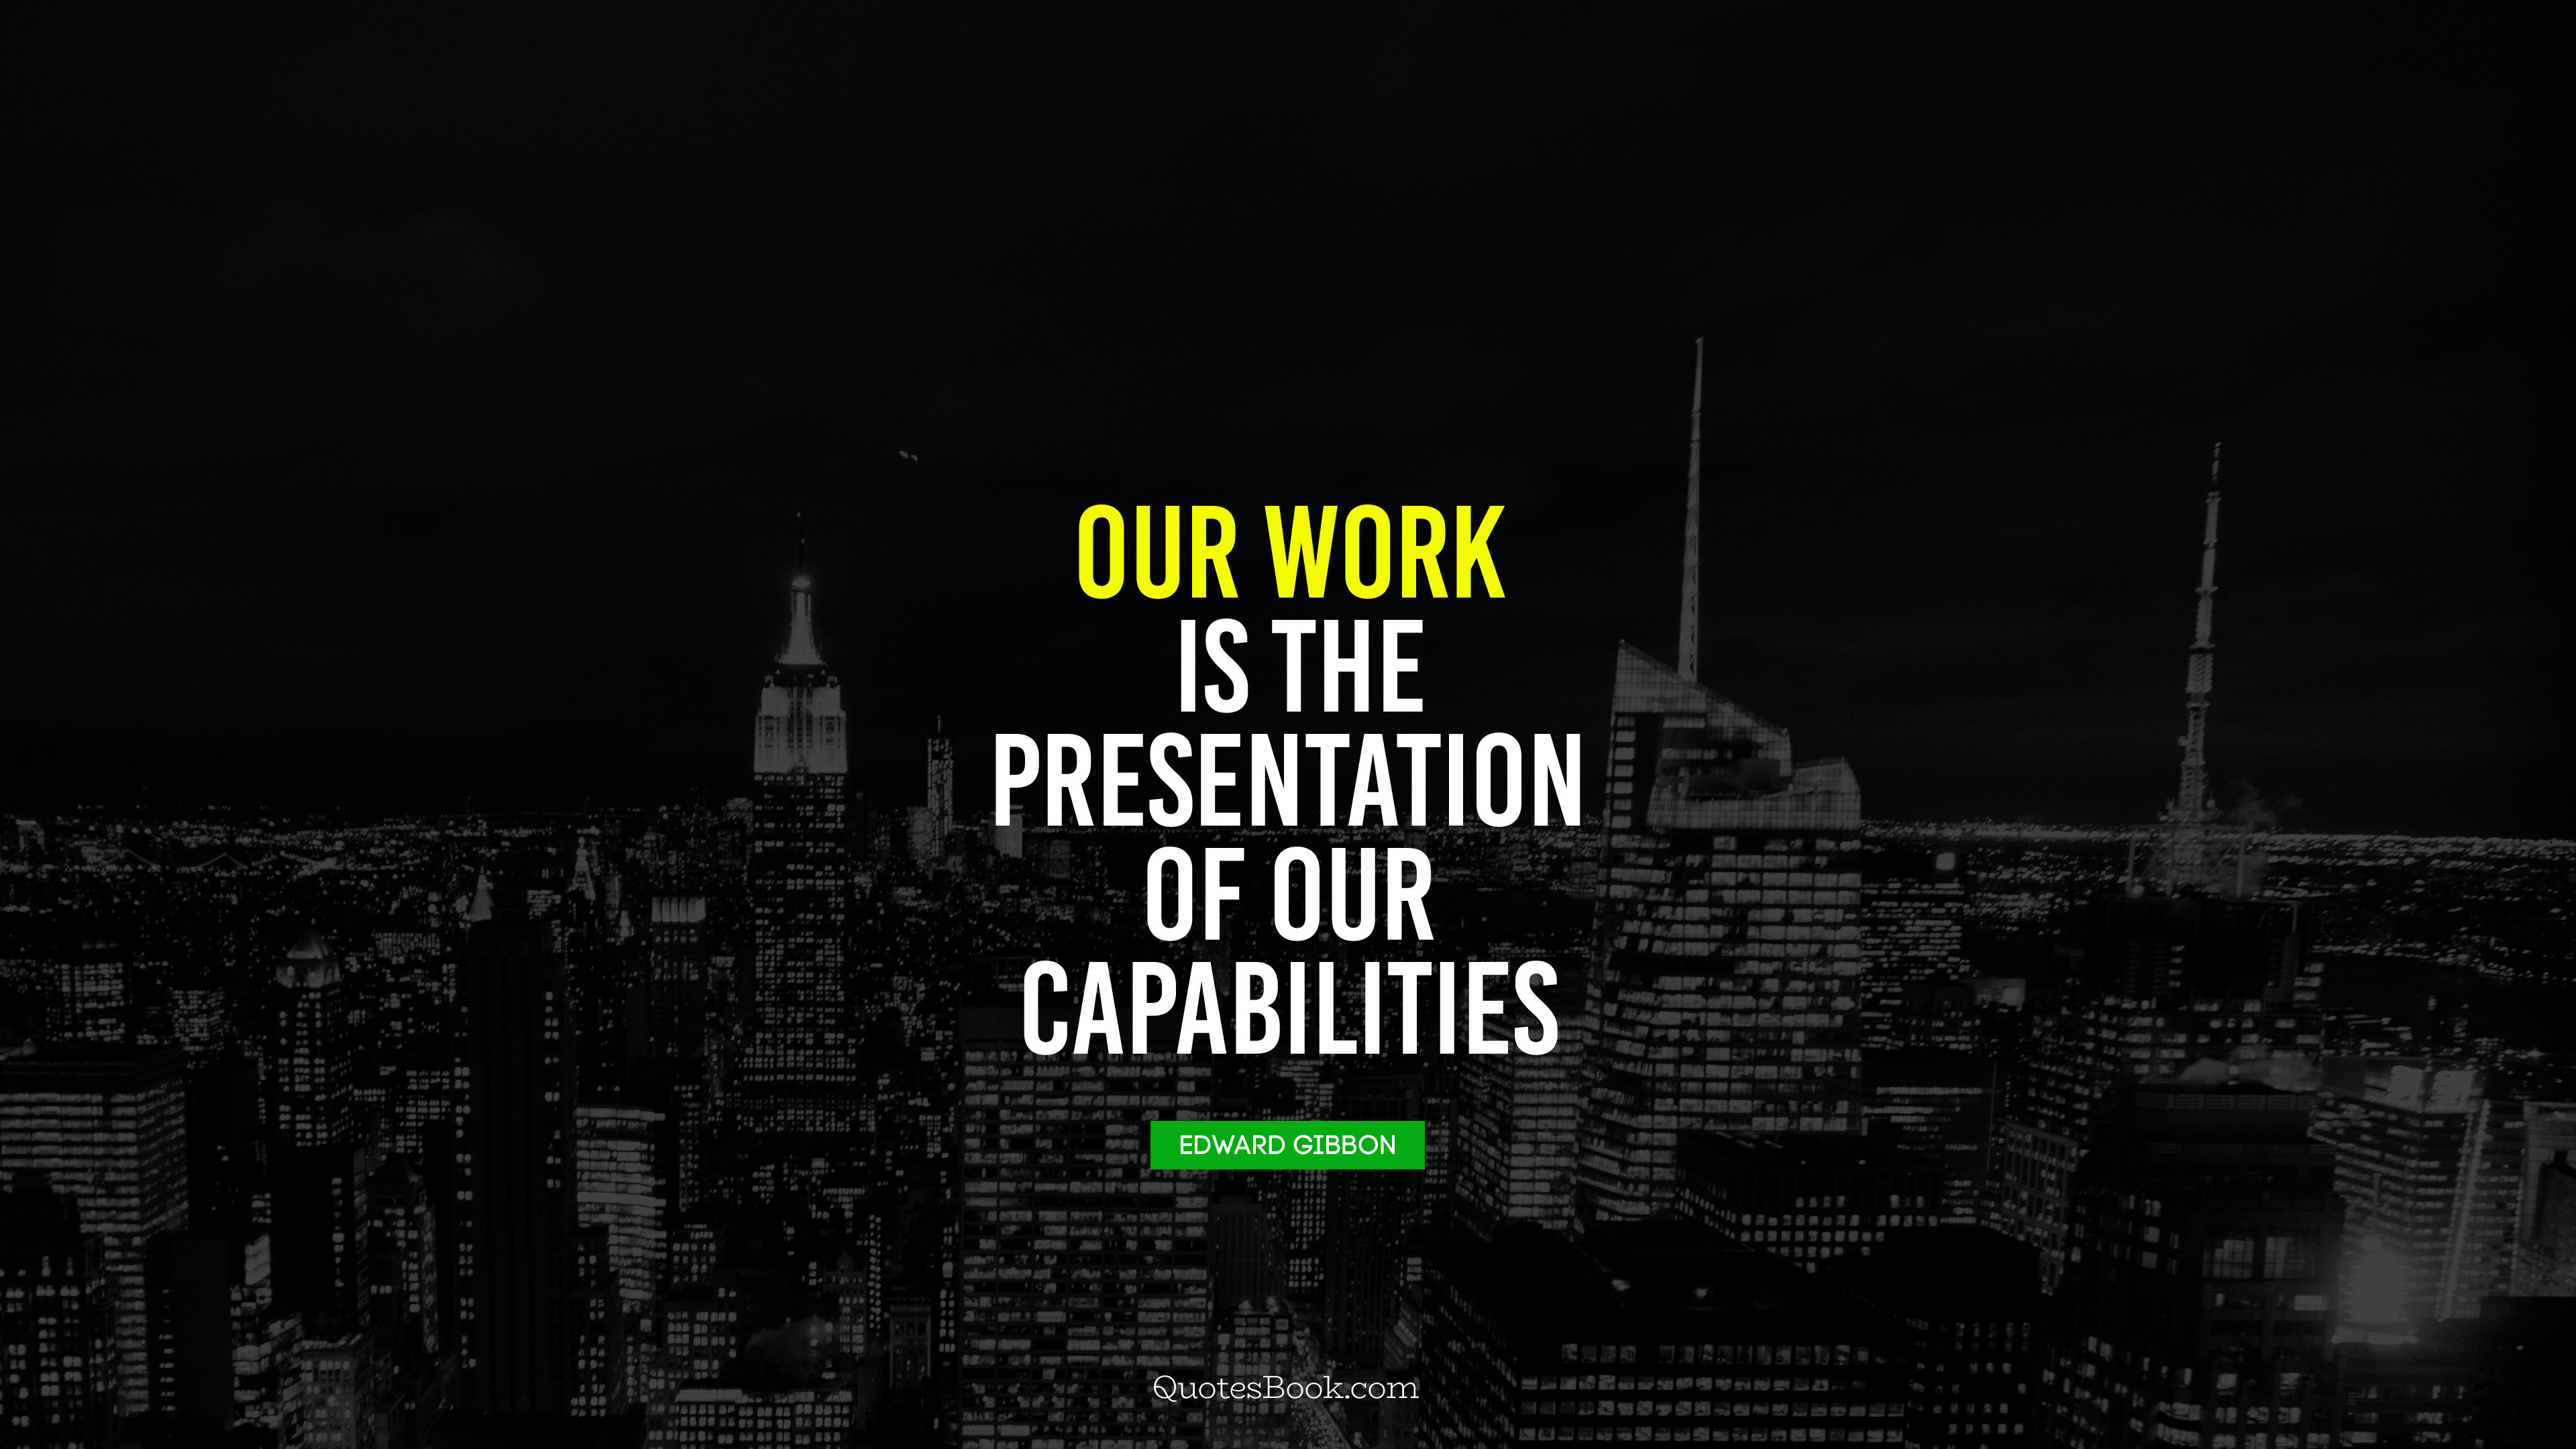 Our work is the presentation of our capabilities. - Quote by Edgar